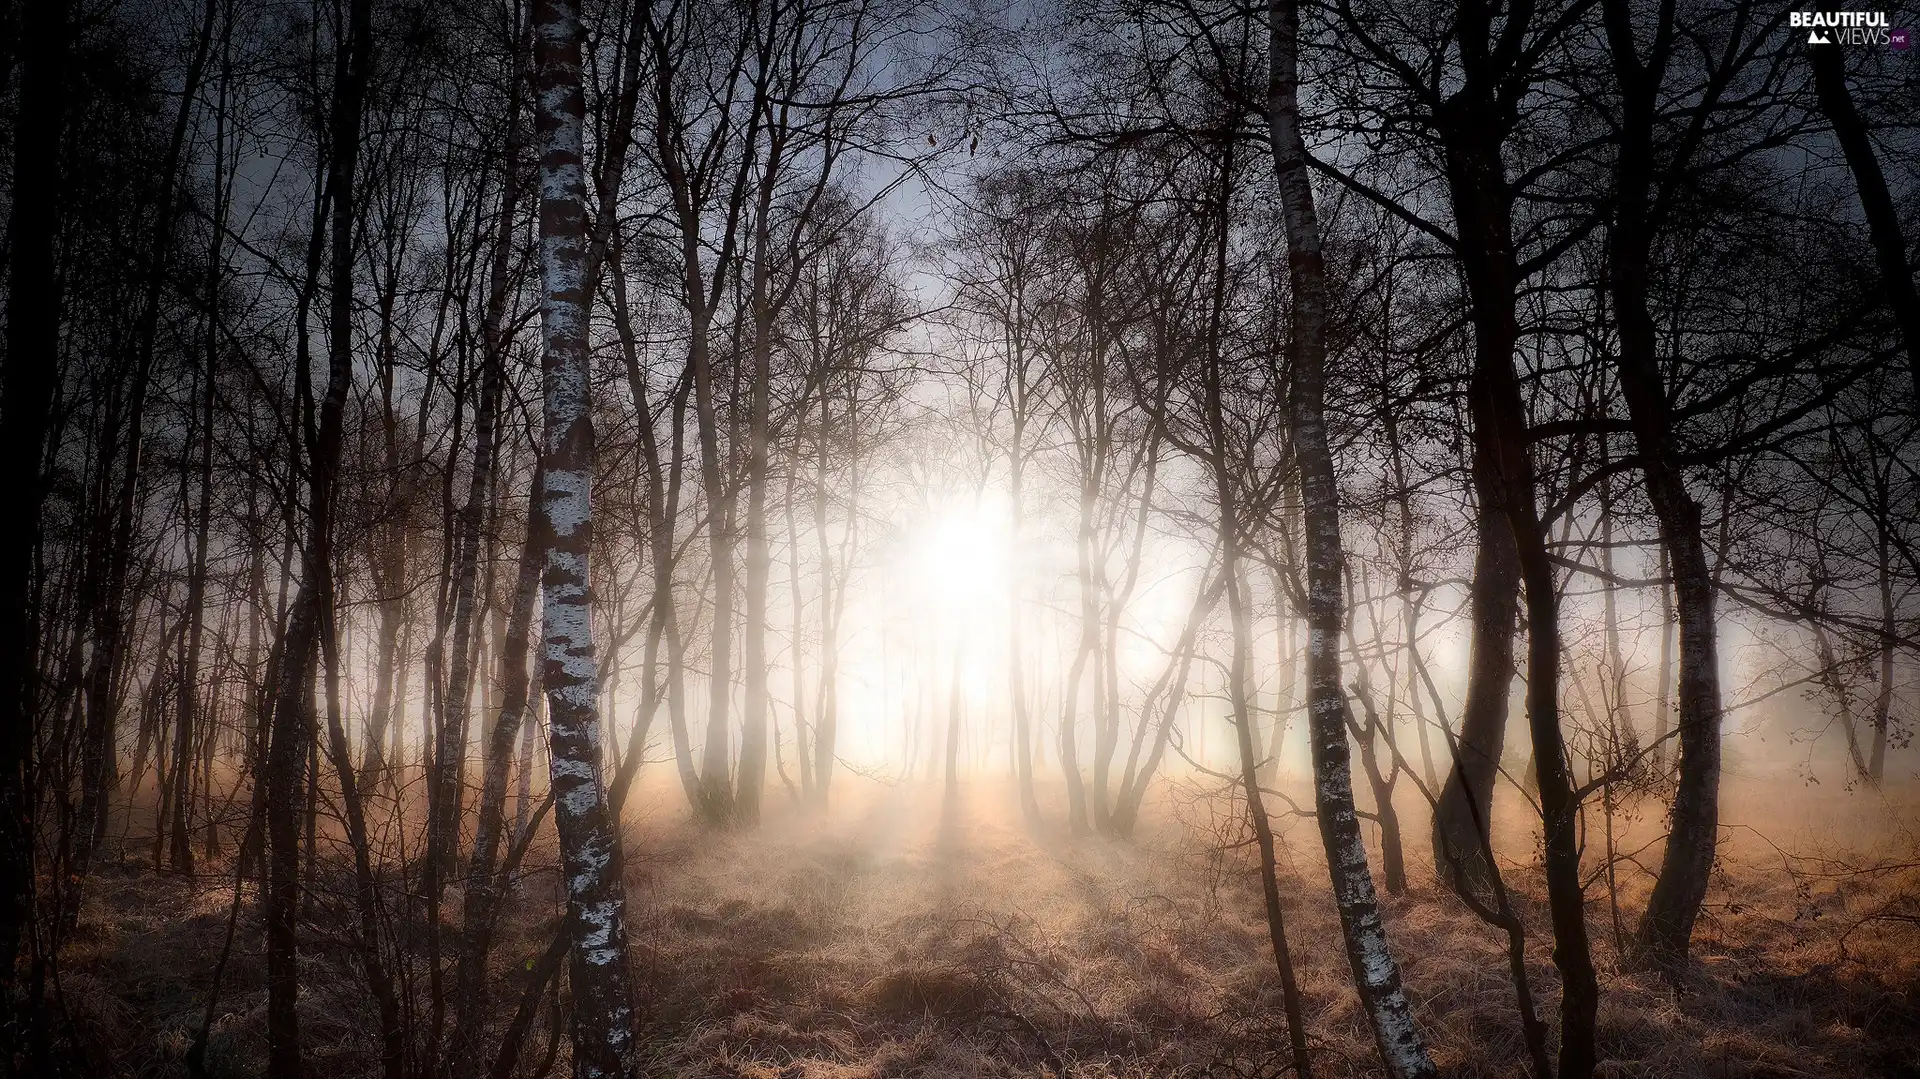 birch, trees, light breaking through sky, viewes, forest, autumn, Fog